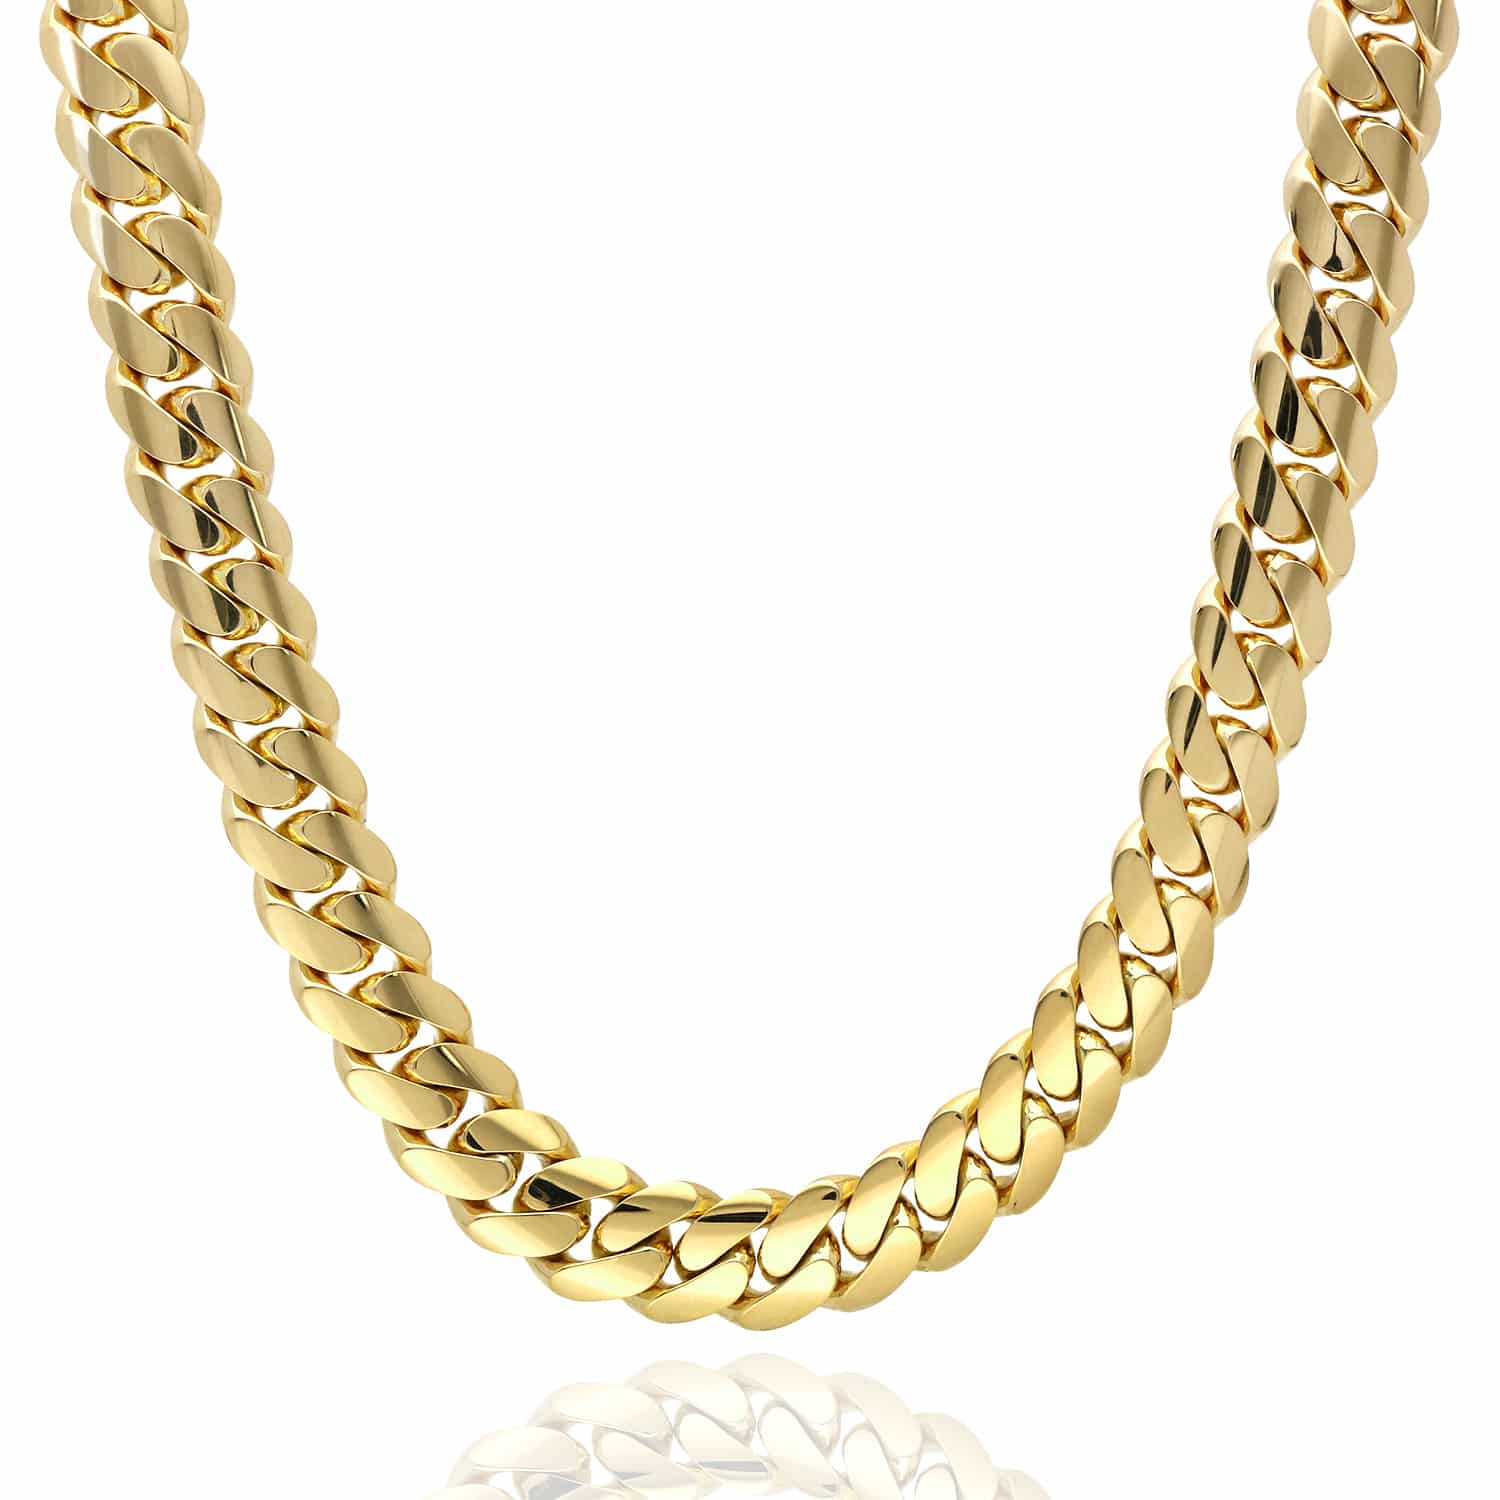 Solid 10K Yellow Gold 11mm Miami Cuban Chain Necklace 18"-28" - 20"